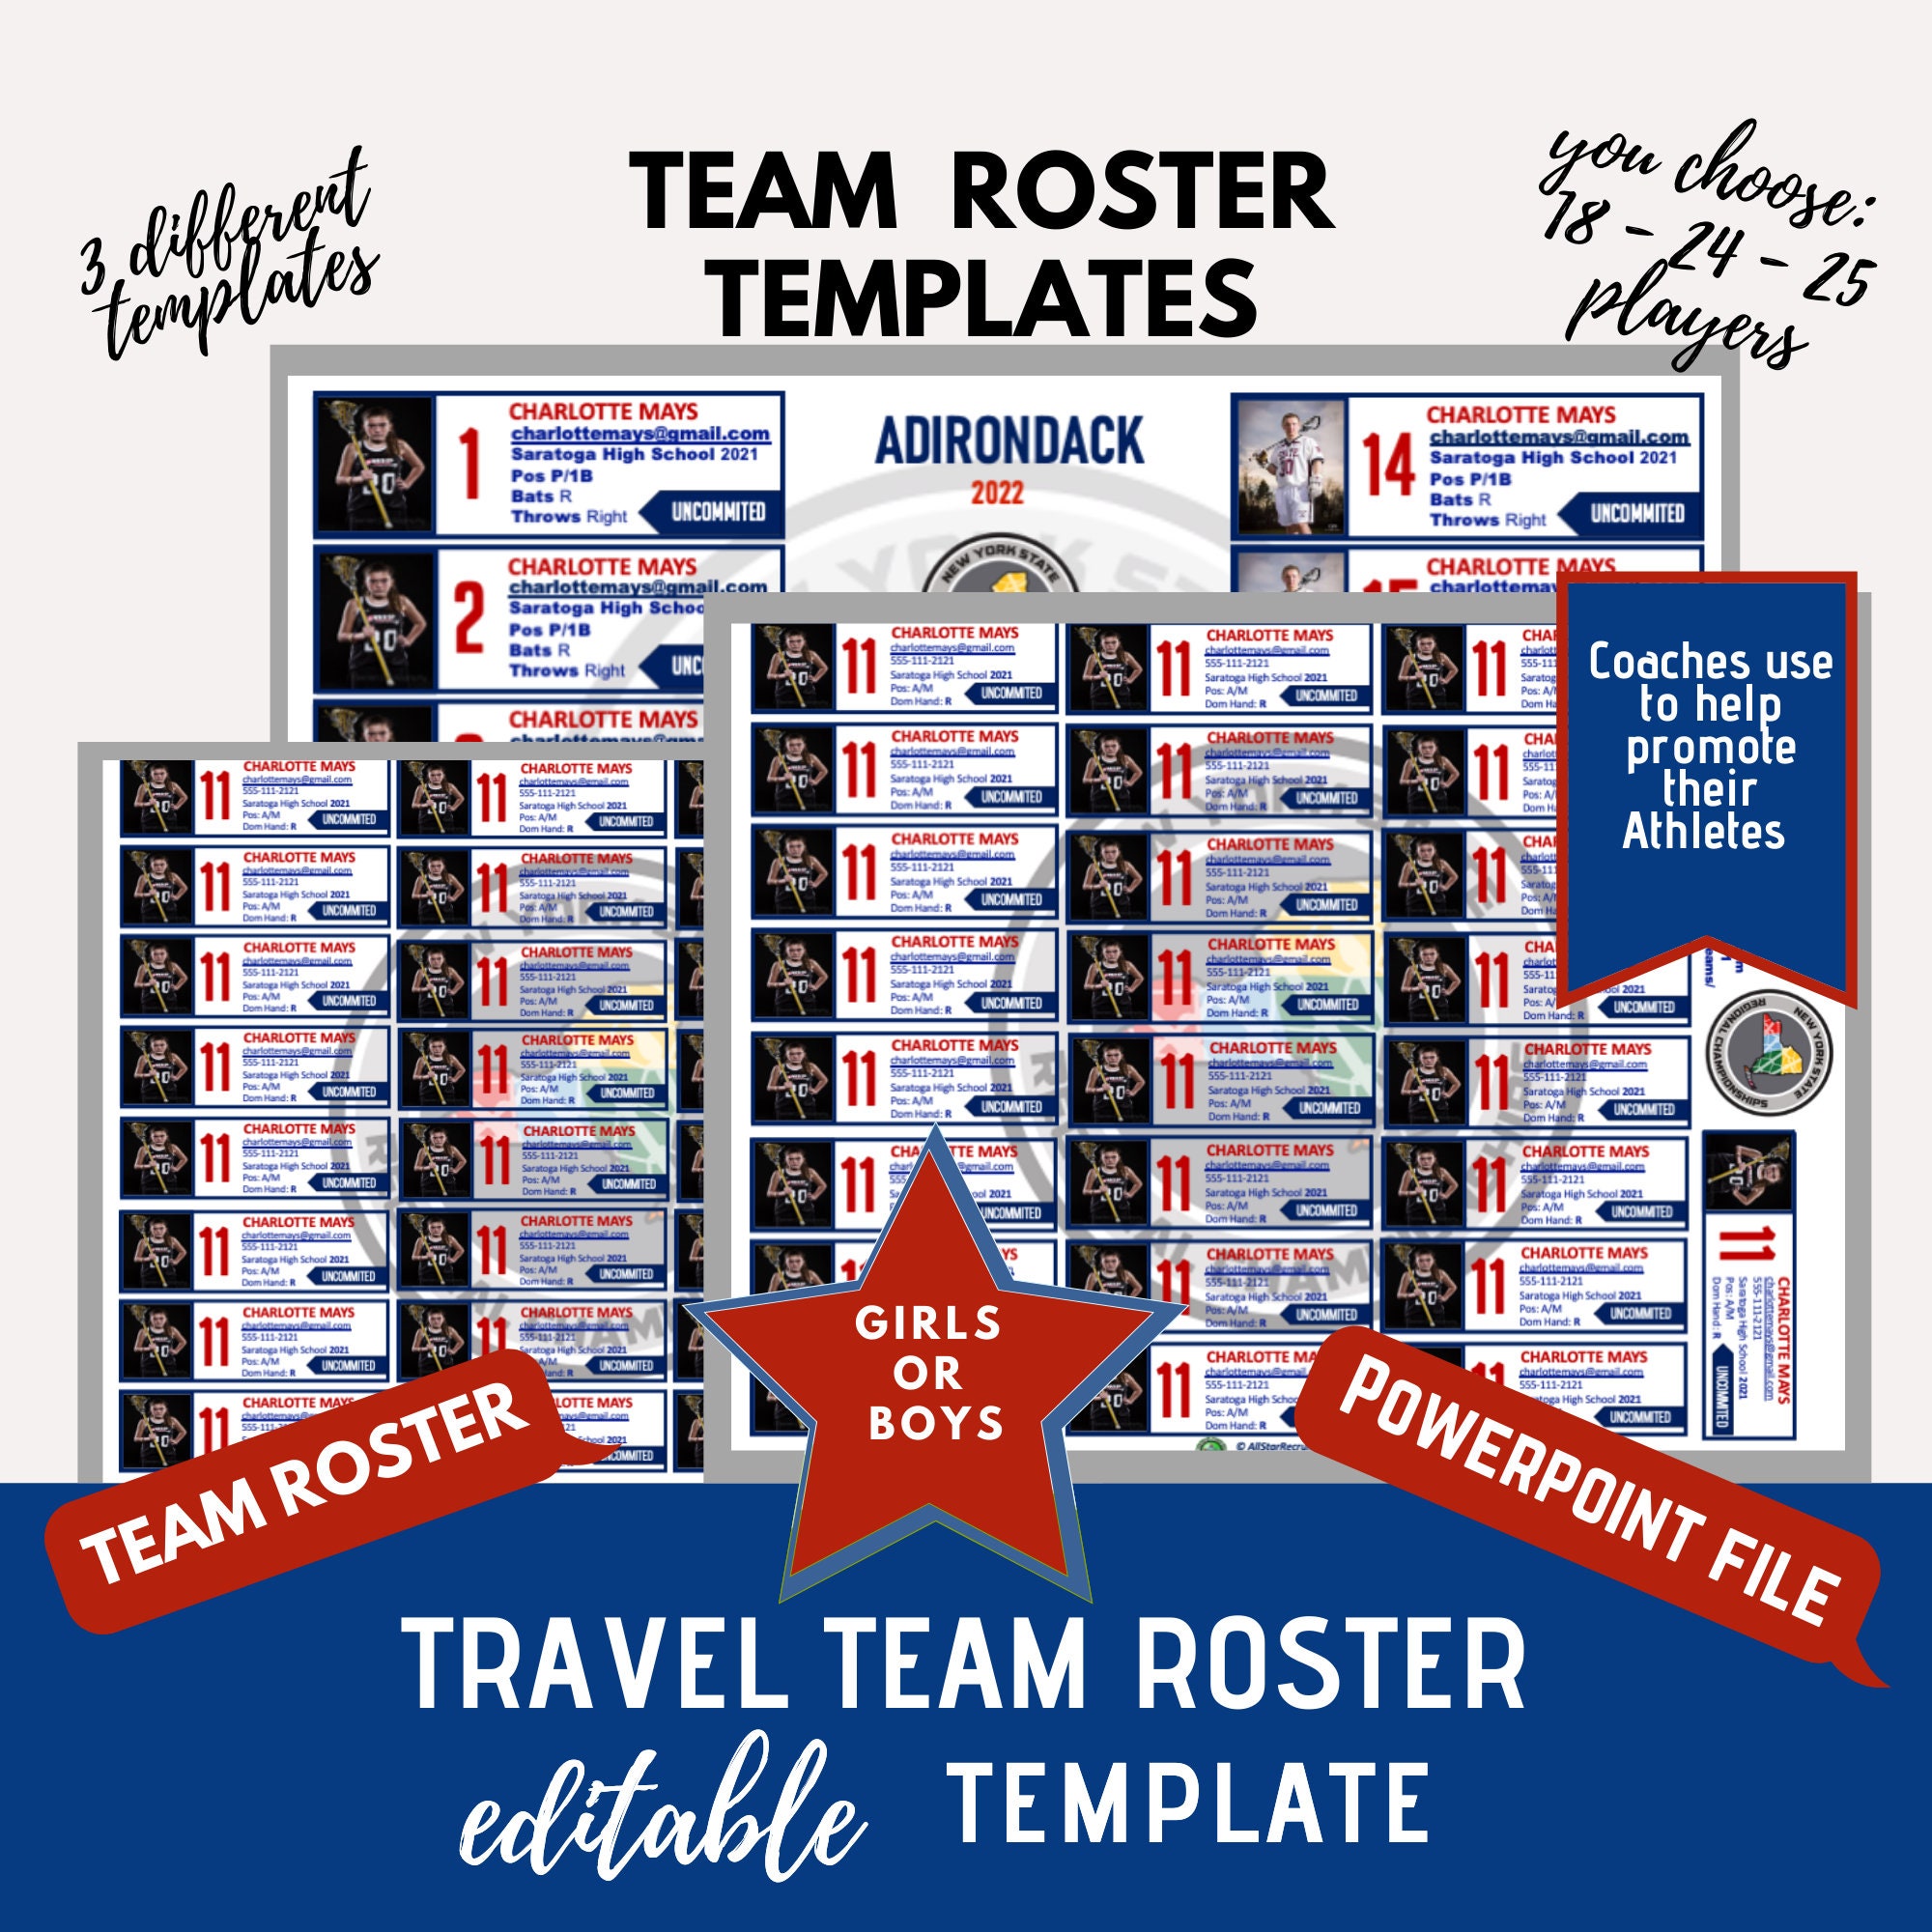 Team Roster Template 3 Pack 18 24 and 25 Players | Etsy